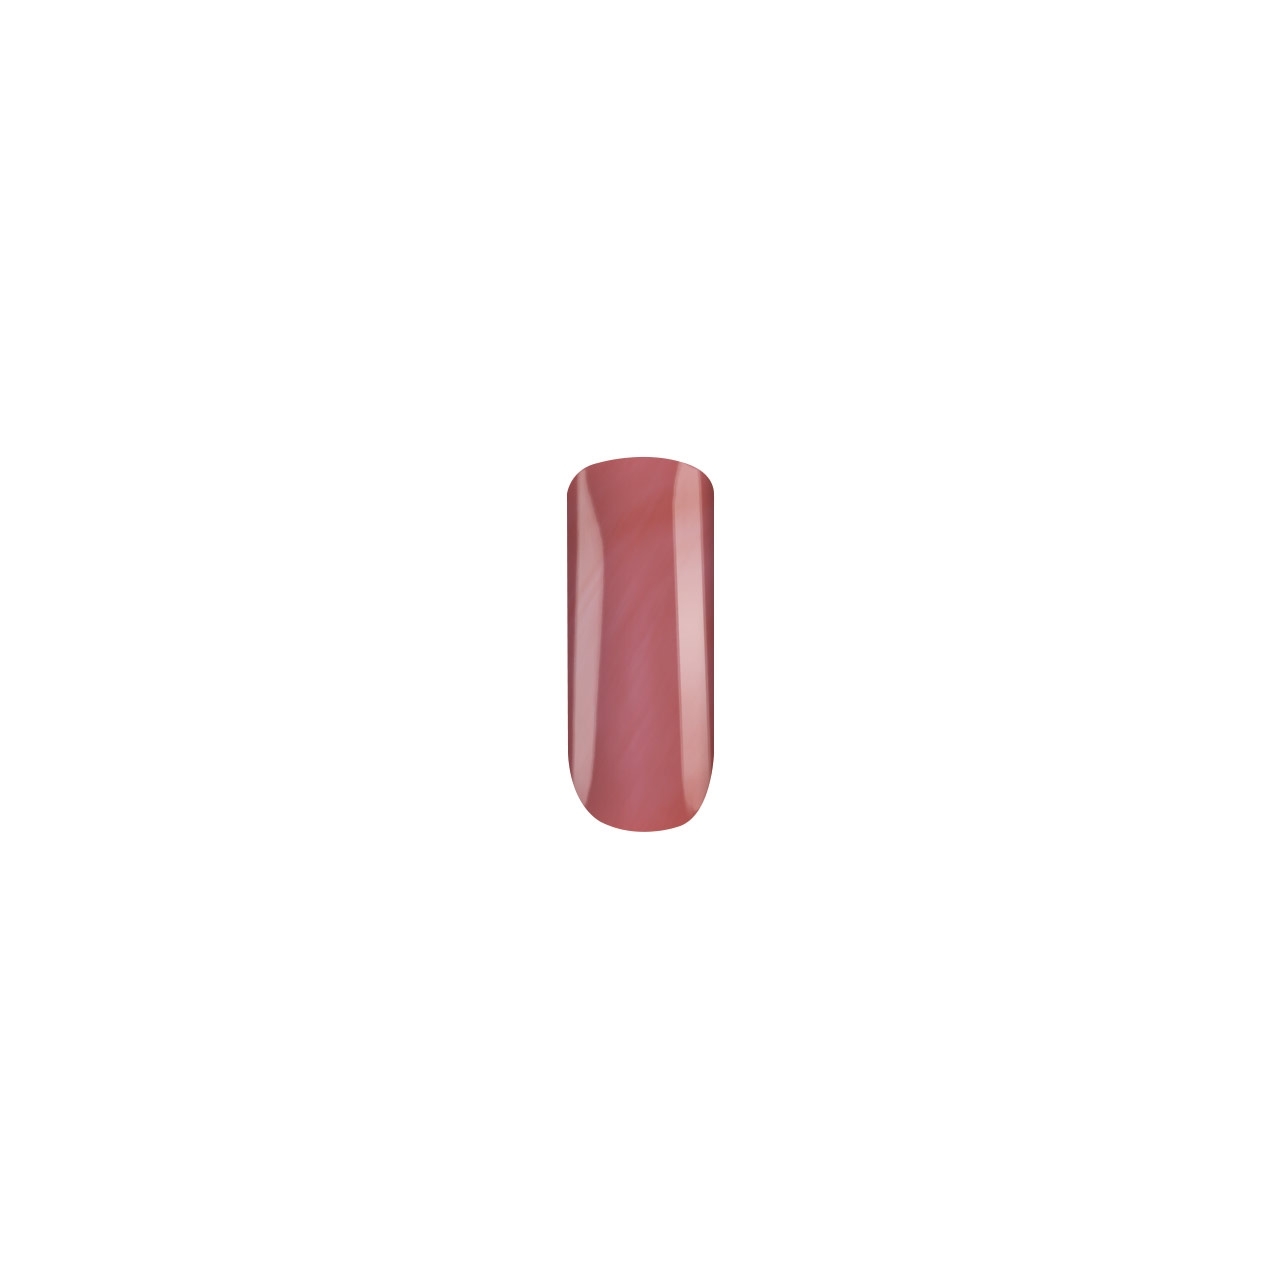 BAEHR BEAUTY CONCEPT - NAILS Nagellack pastell rose pearl 11 ml